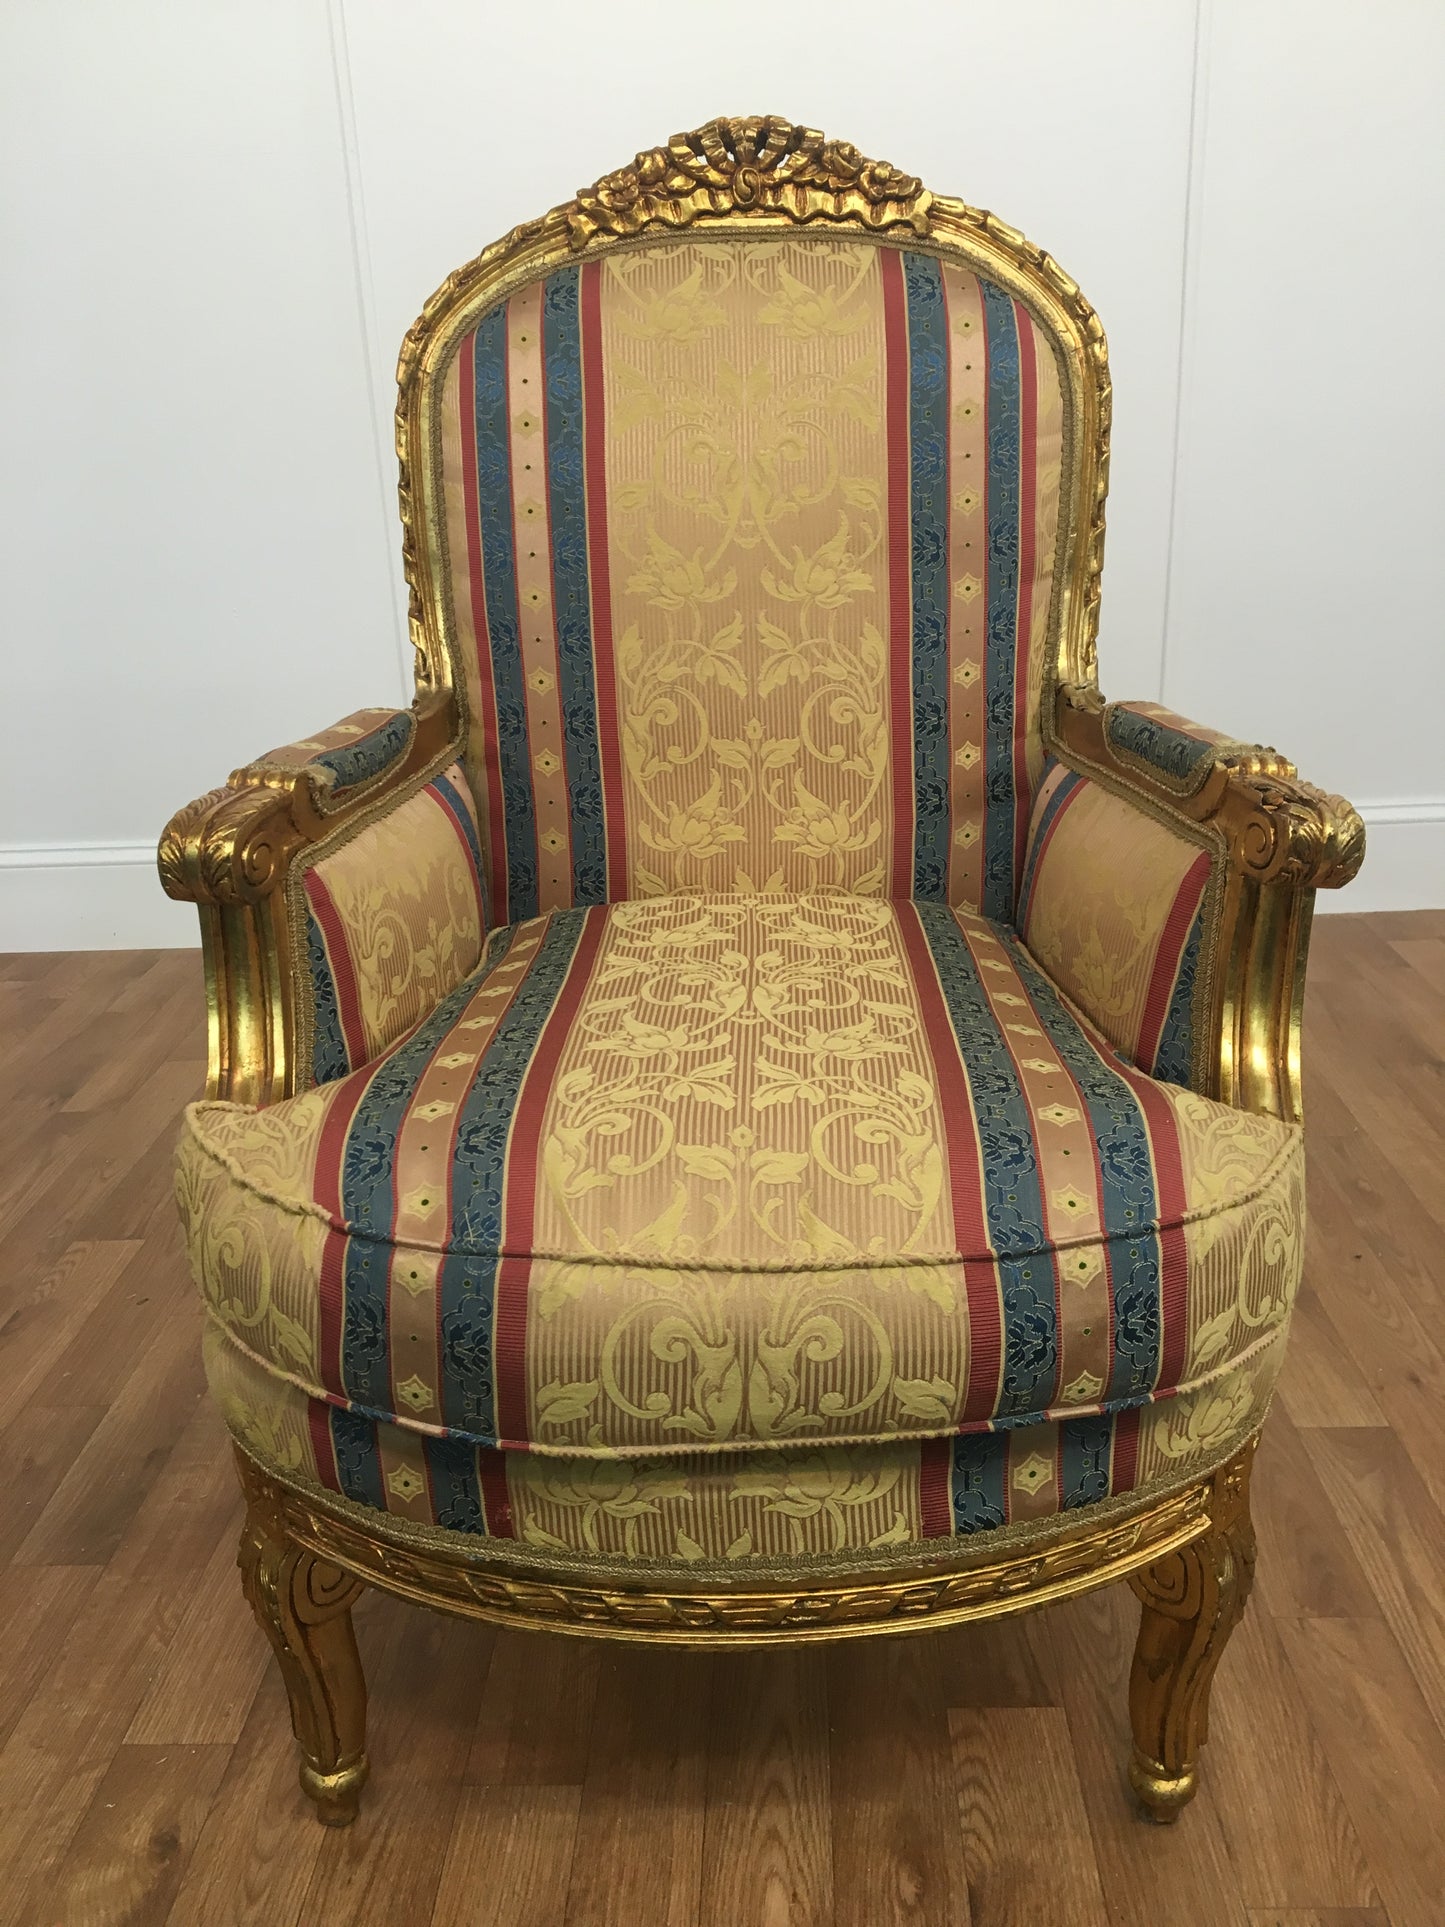 RED, GOLD  AND BLUE STRIPED ORNATE ARM CHAIR